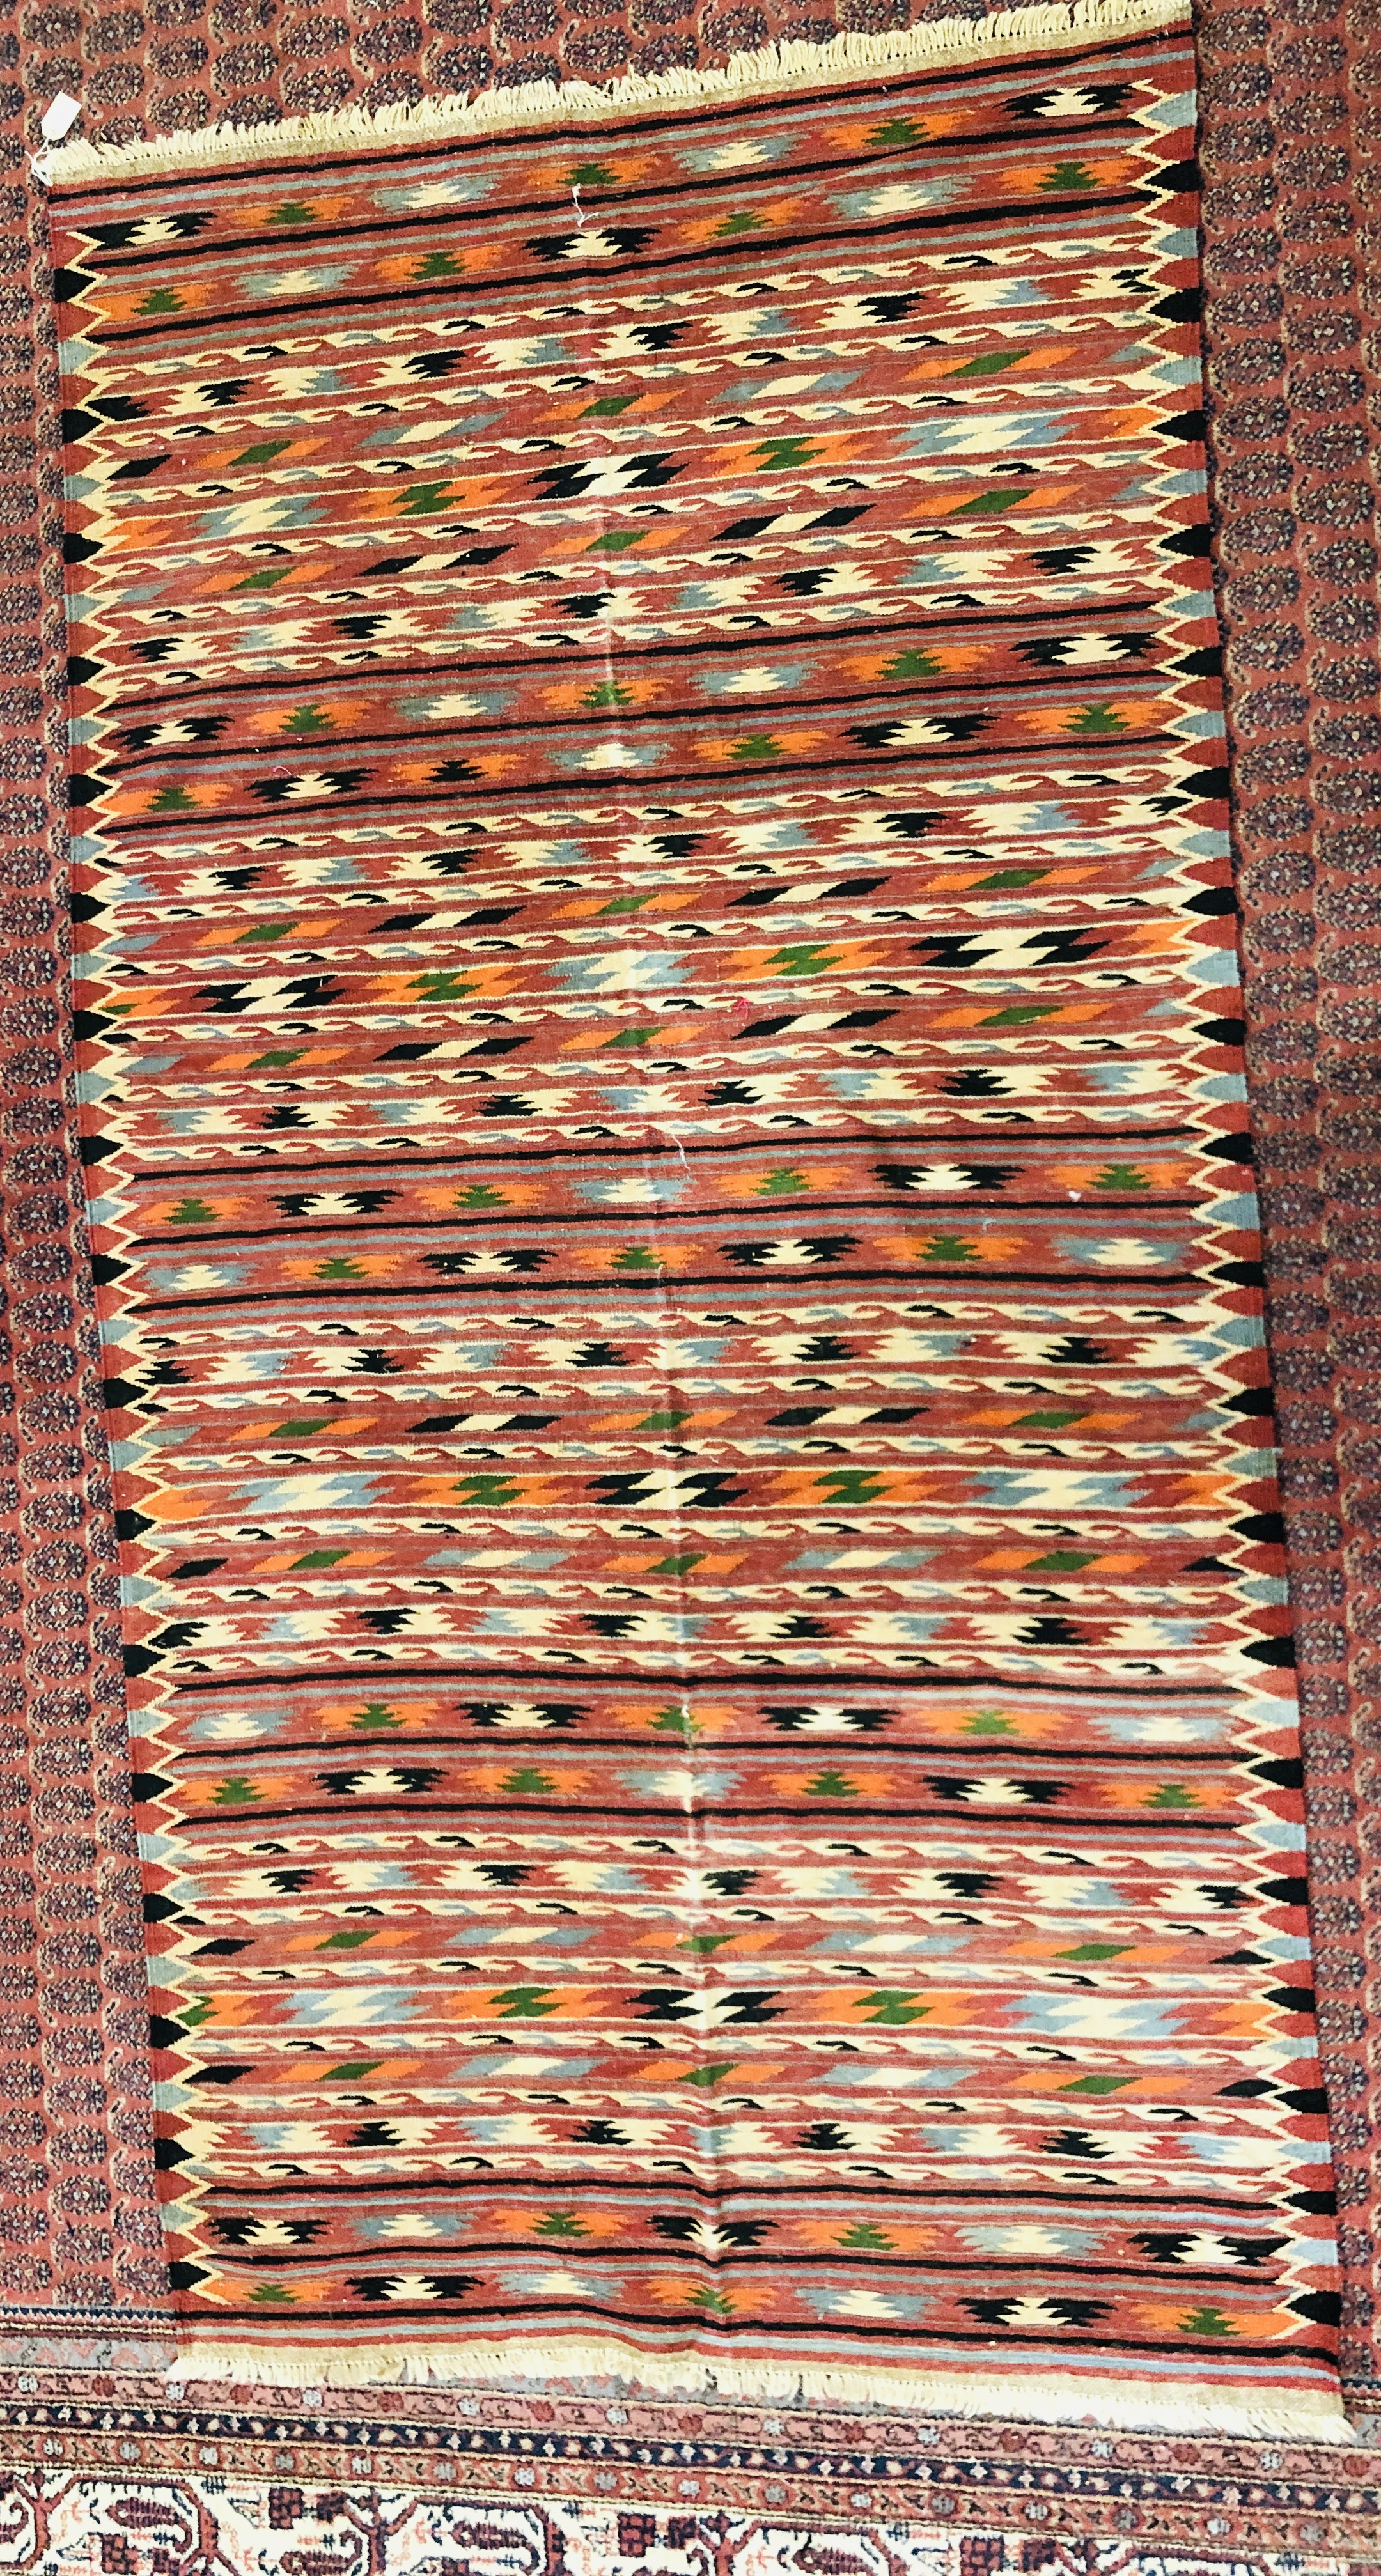 TWO PERSAIN STYLE FLAT WEAVE RUGS 280CM. X 138CM. , 169CM. X 138CM. - Image 8 of 12